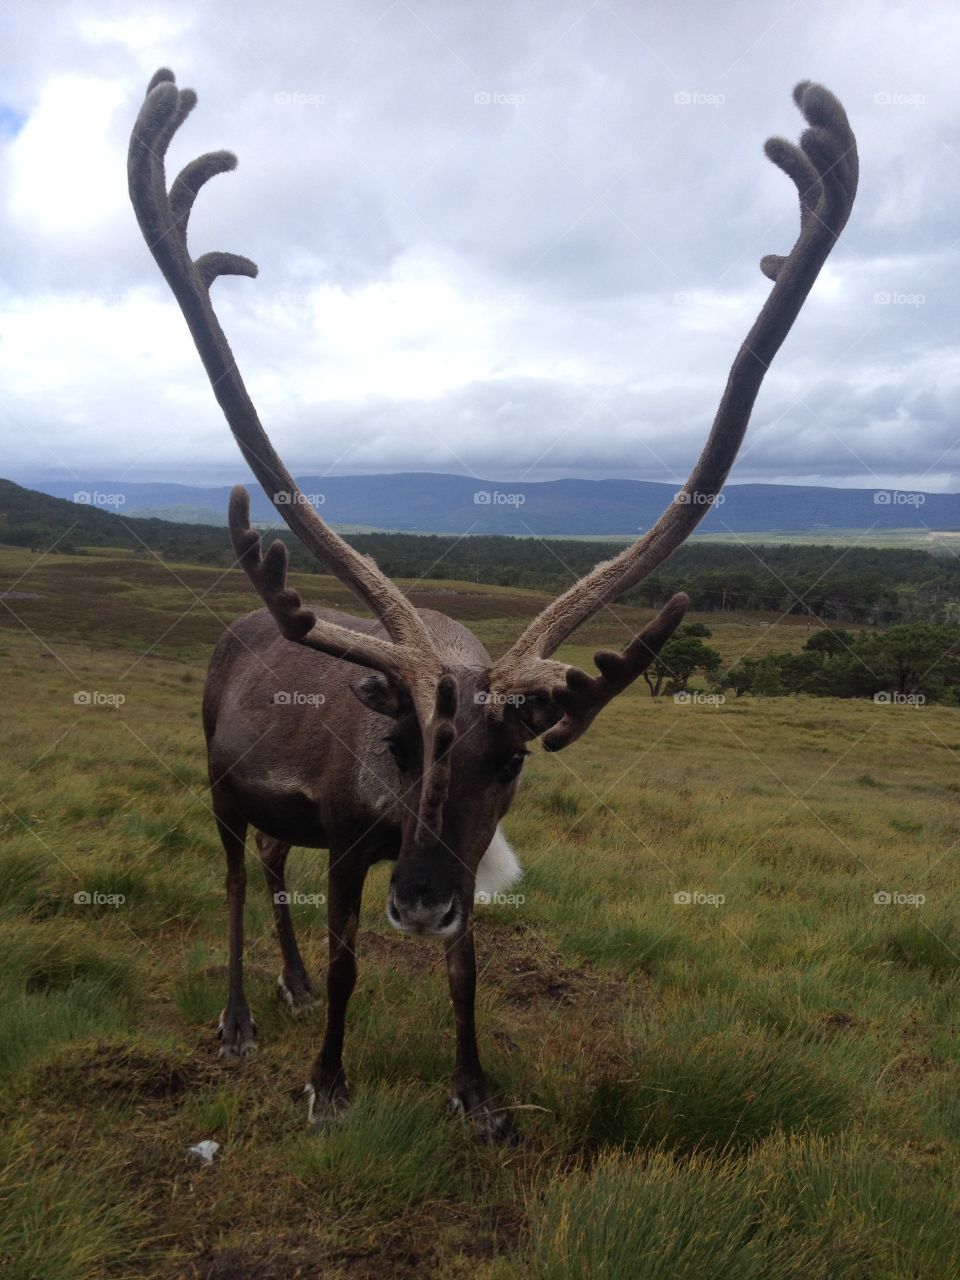 Reindeer standing on grassy field at hill